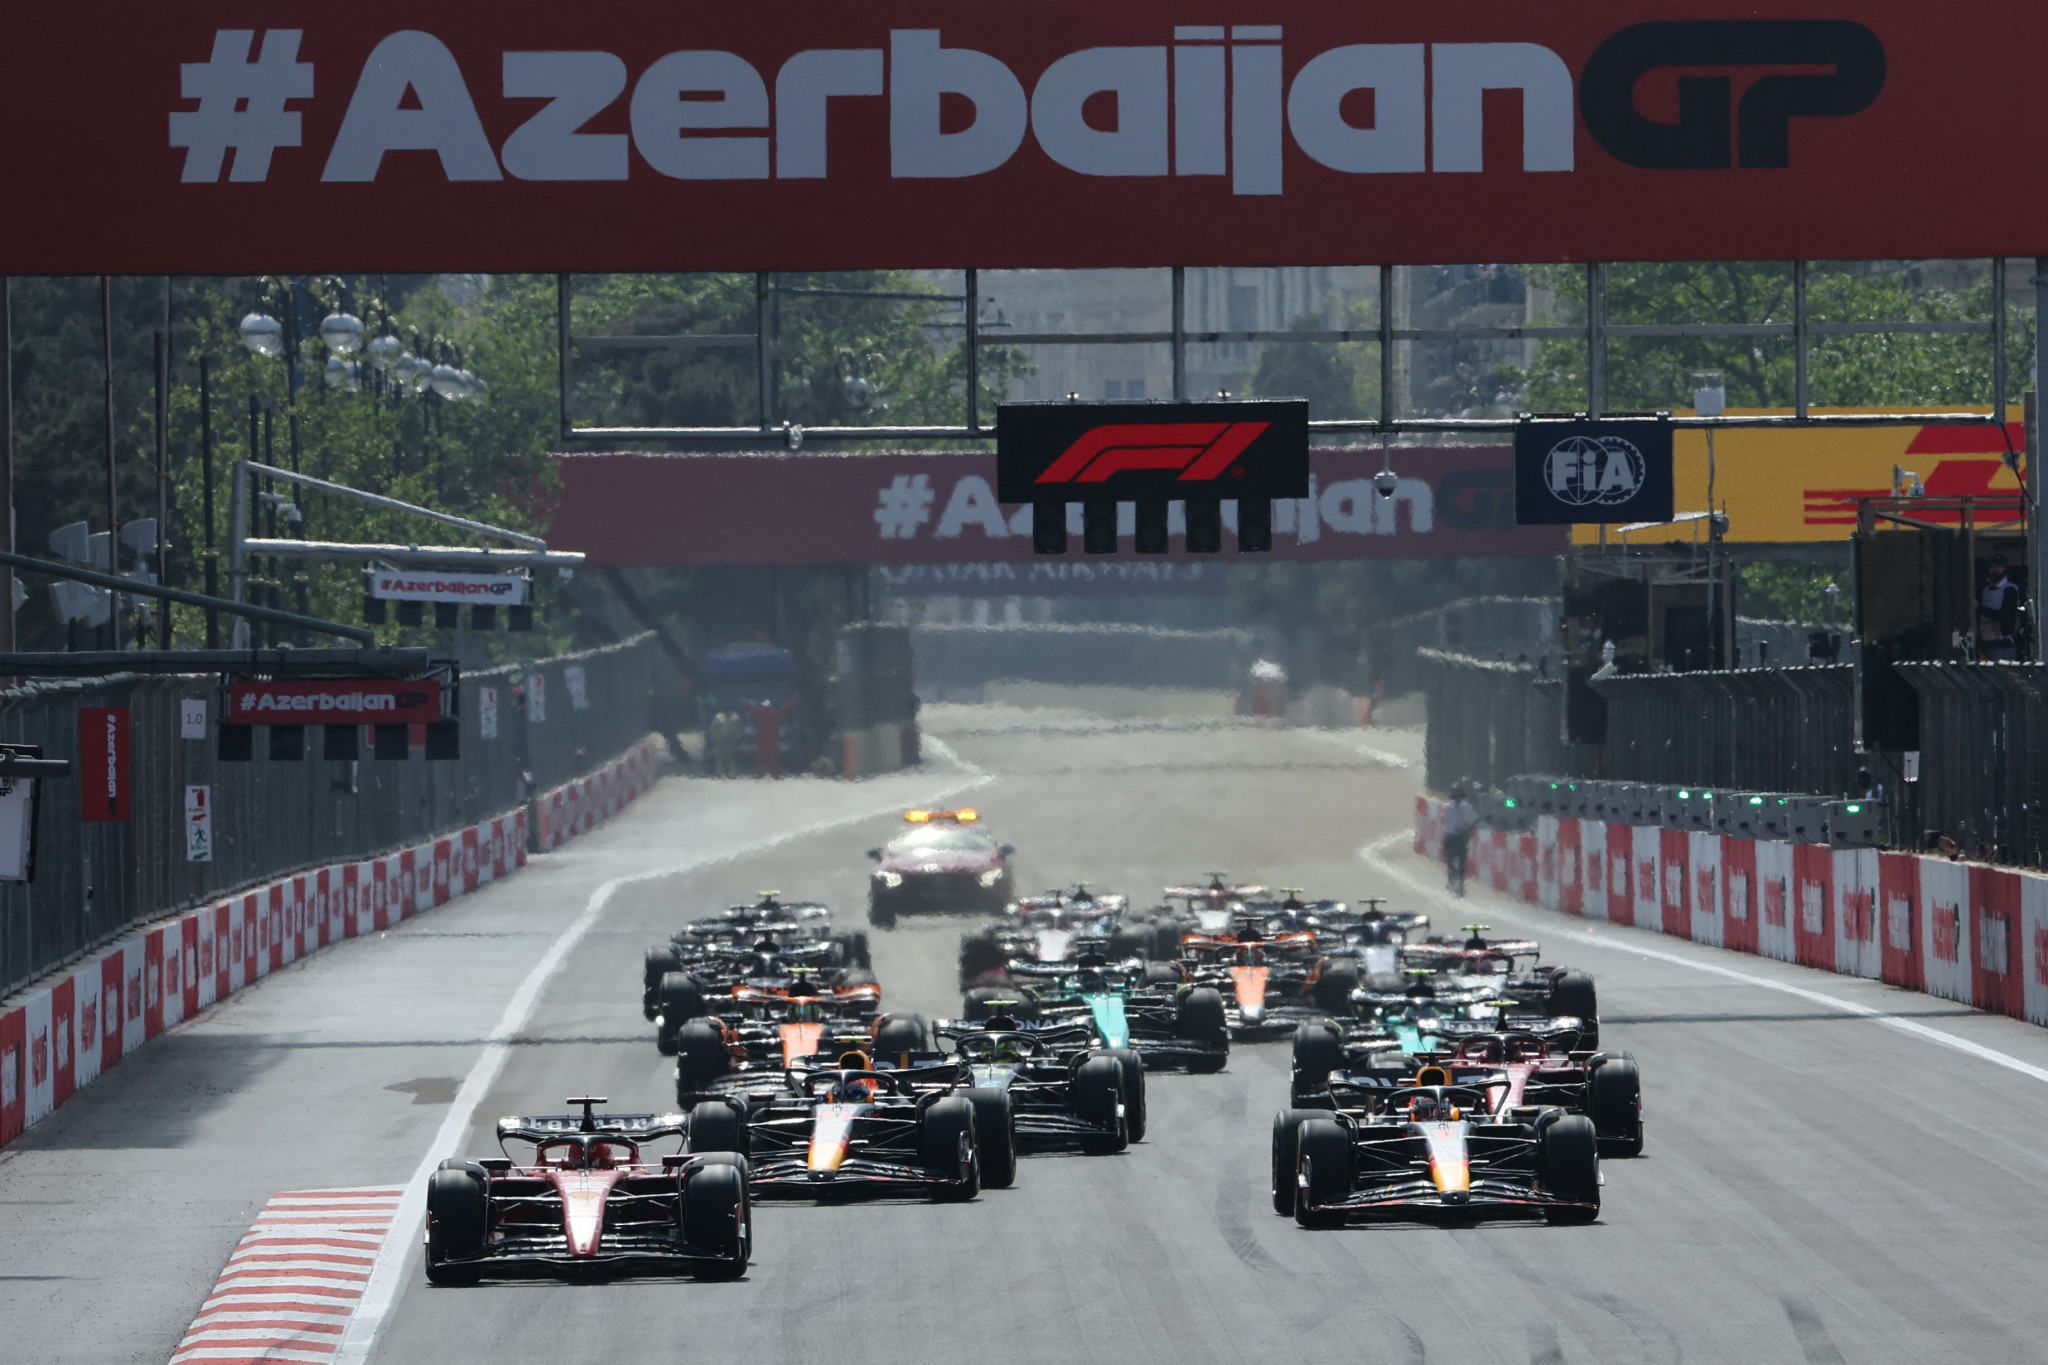 The Azerbaijan Grand Prix is a regular fixture on the Formula One calendar ©Getty Images